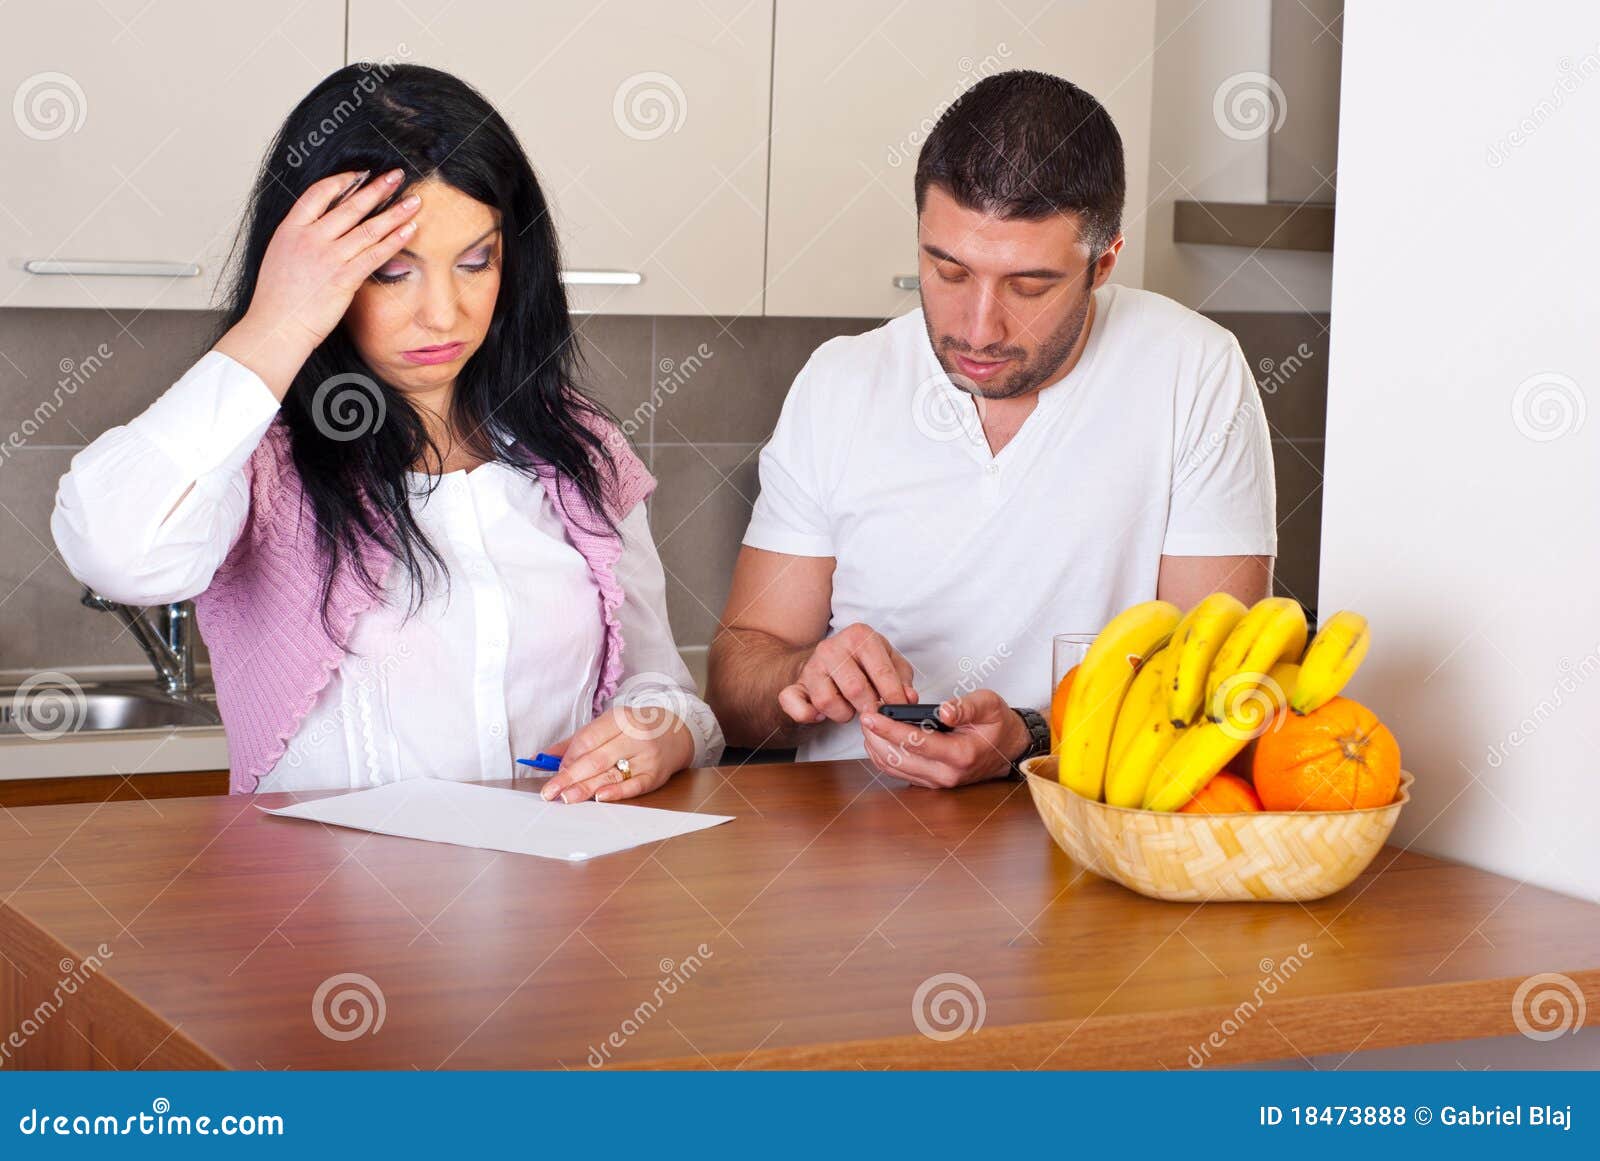 couple having difficult to calculate expenses